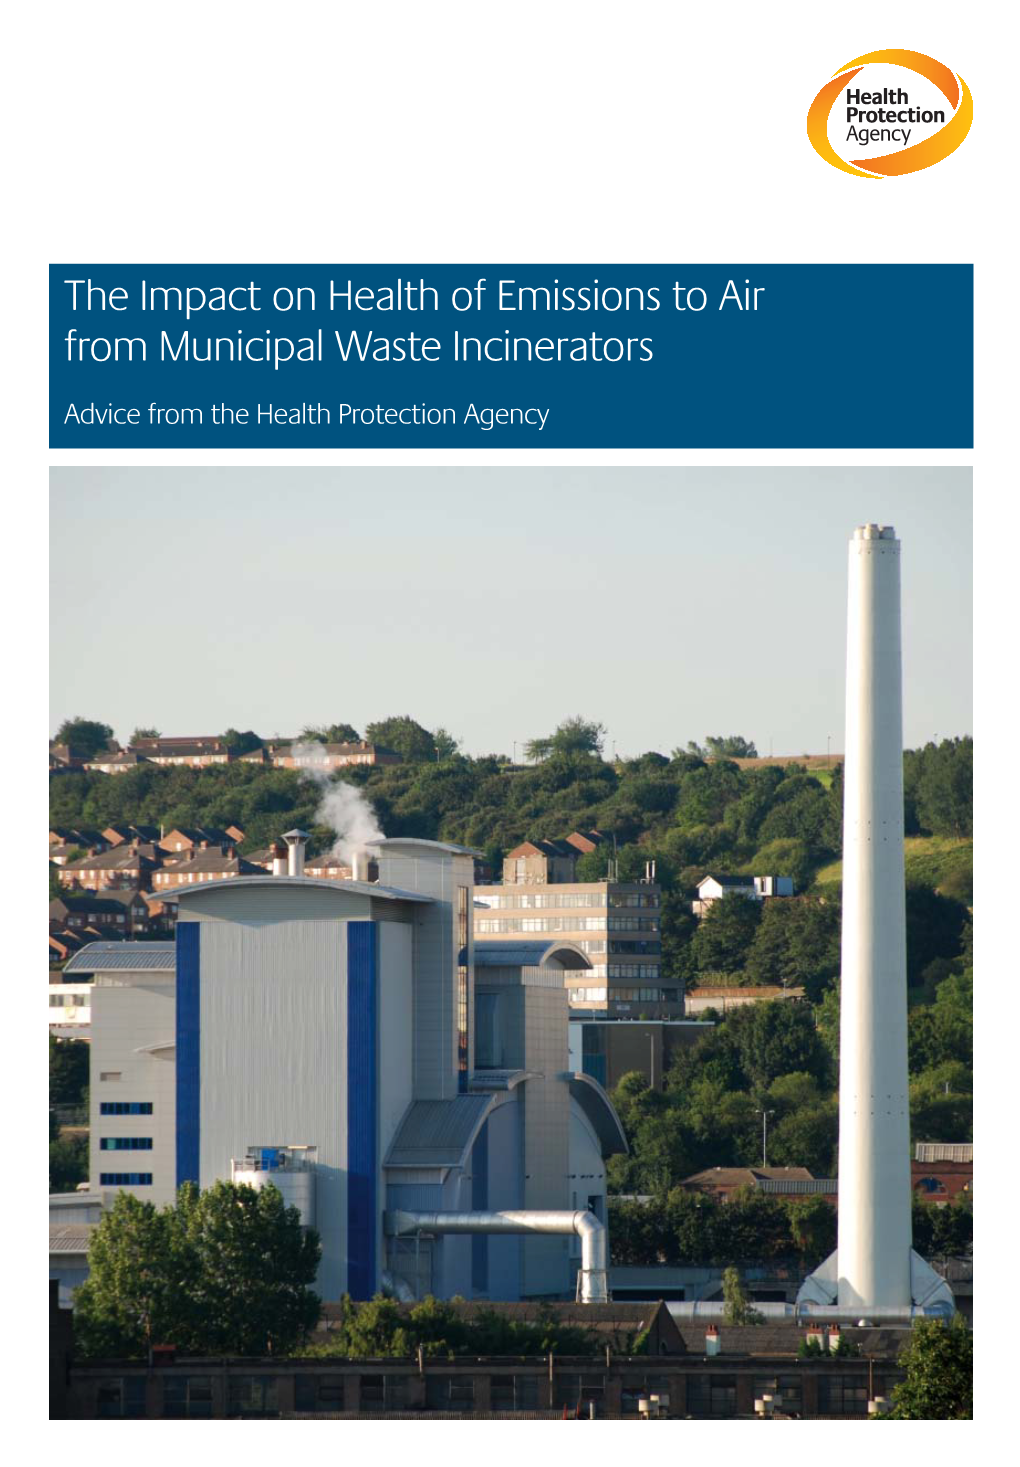 The Impact on Health of Emissions to Air from Municipal Waste Incinerators